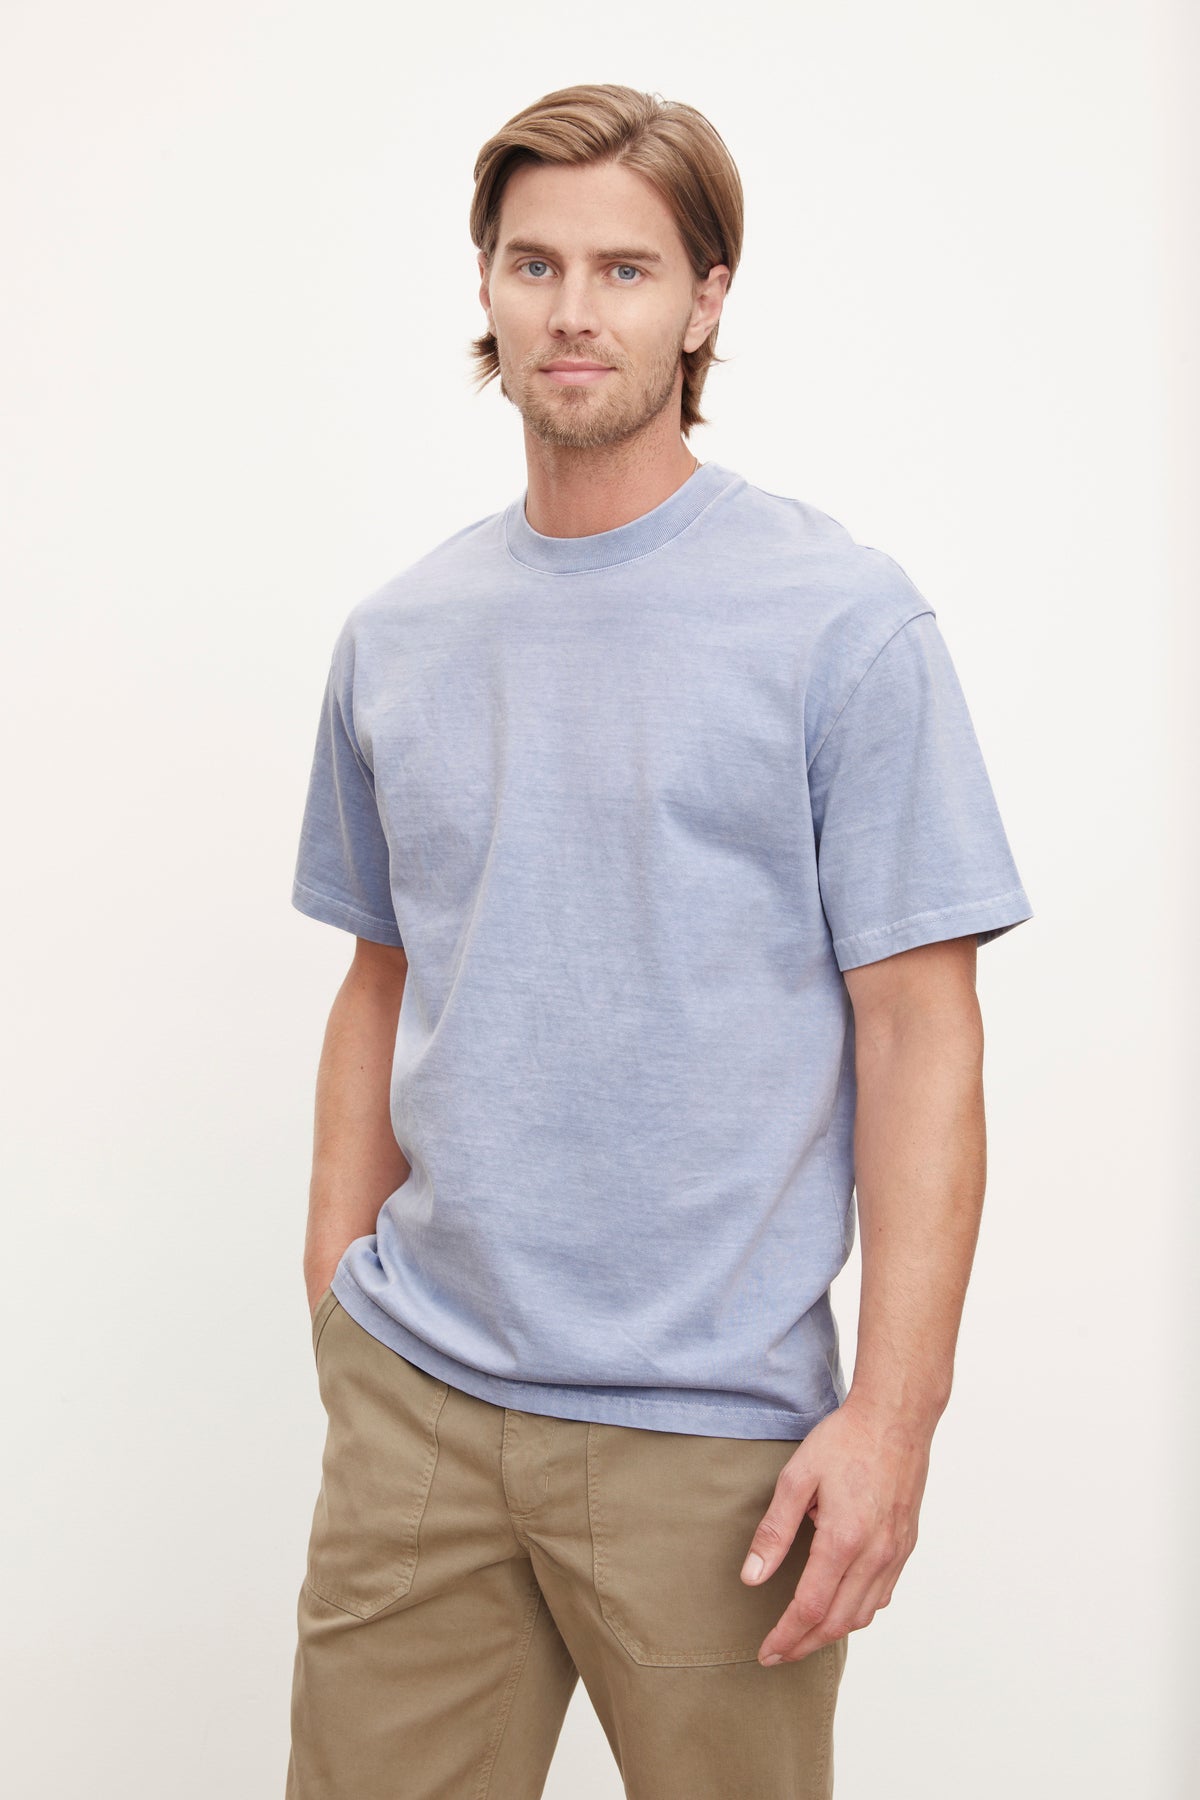 A man in a relaxed fit, plain blue cotton JACOBI HEAVY JERSEY CREW NECK TEE and khaki pants standing against a white background by Velvet by Graham & Spencer.-36009992716481